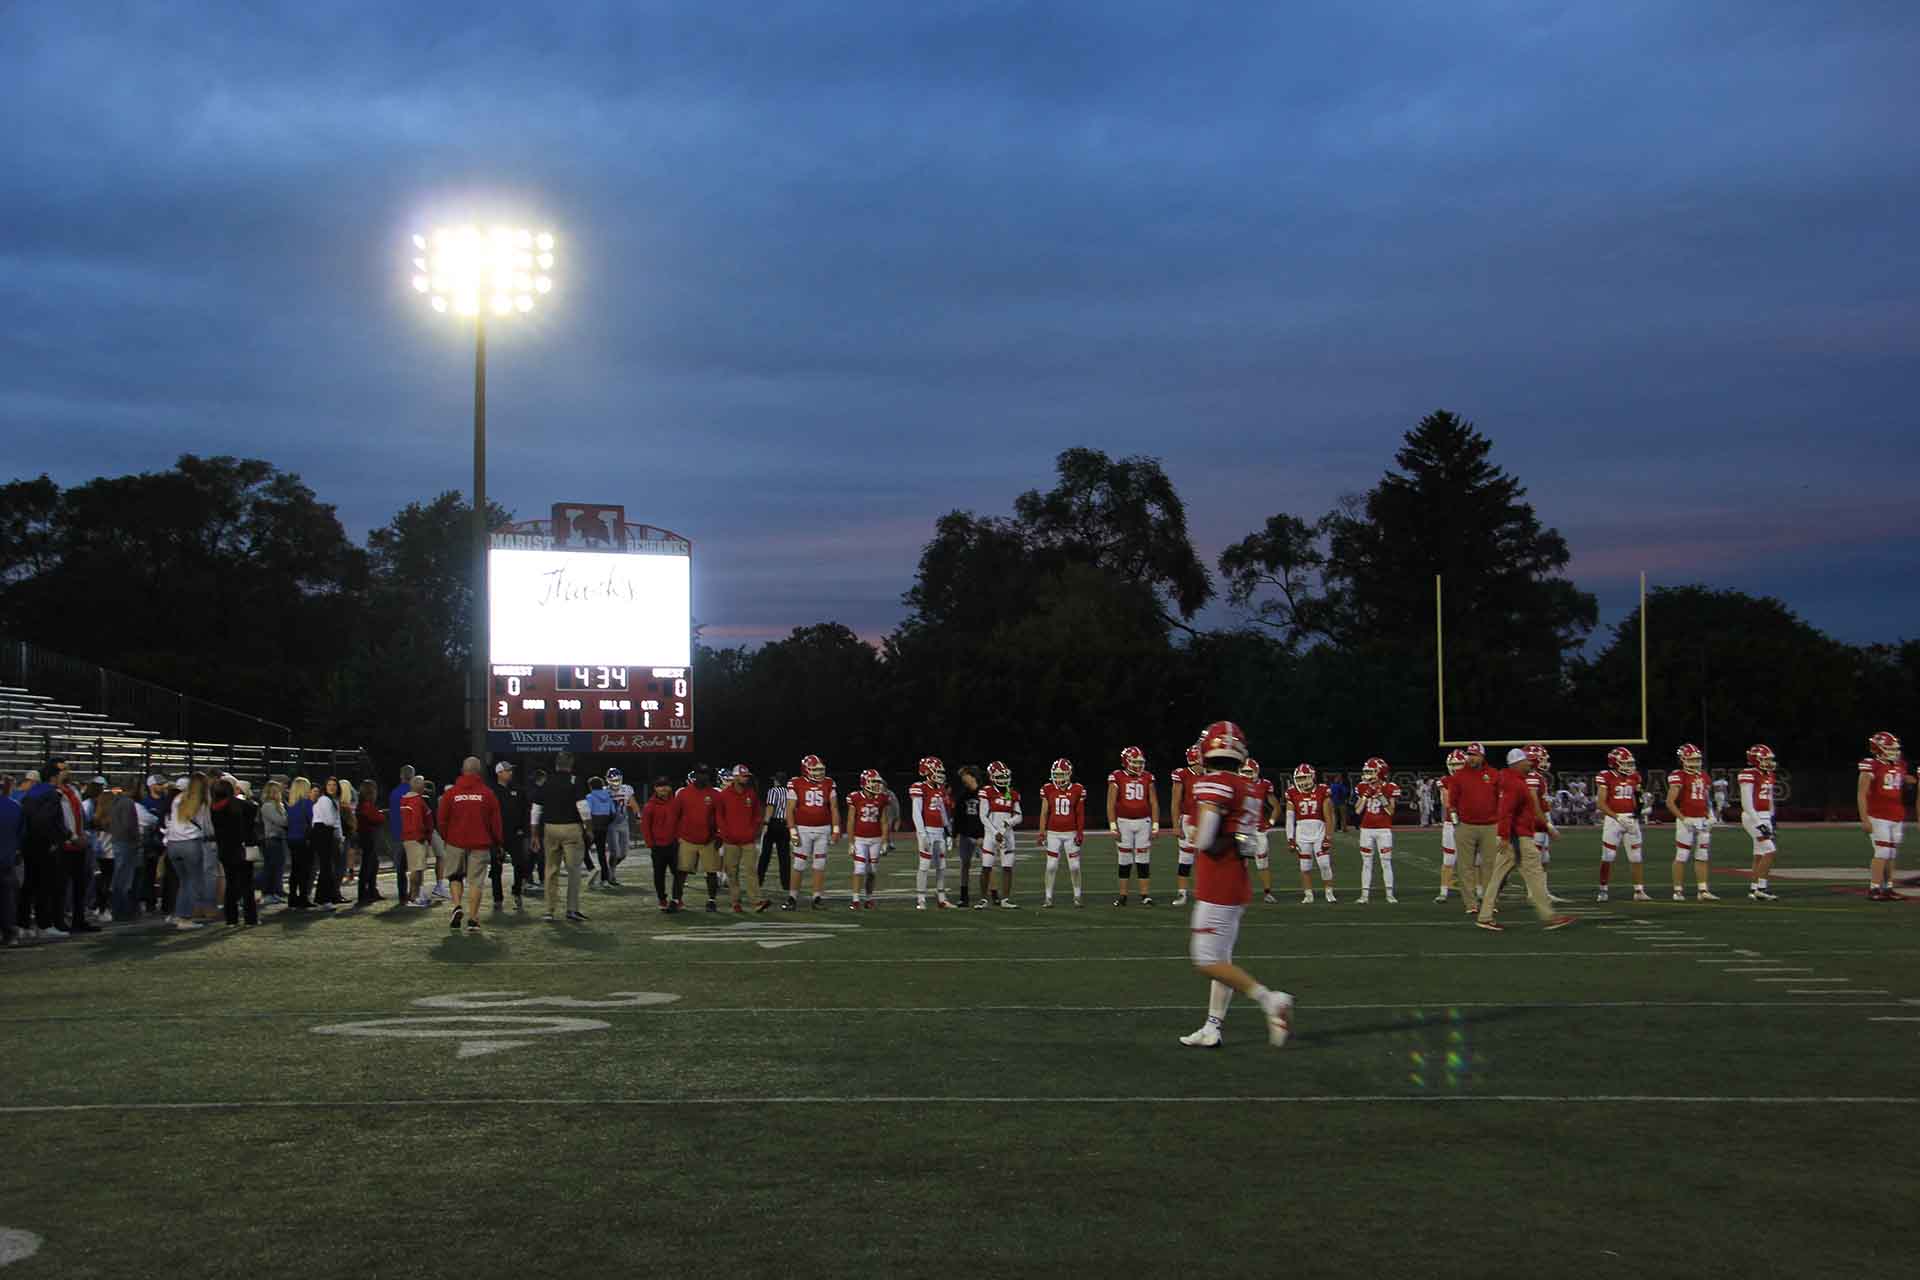 2017-5-Year-Reunion-and-Scoreboard-Dedication-football-players-and-crowd-at-night